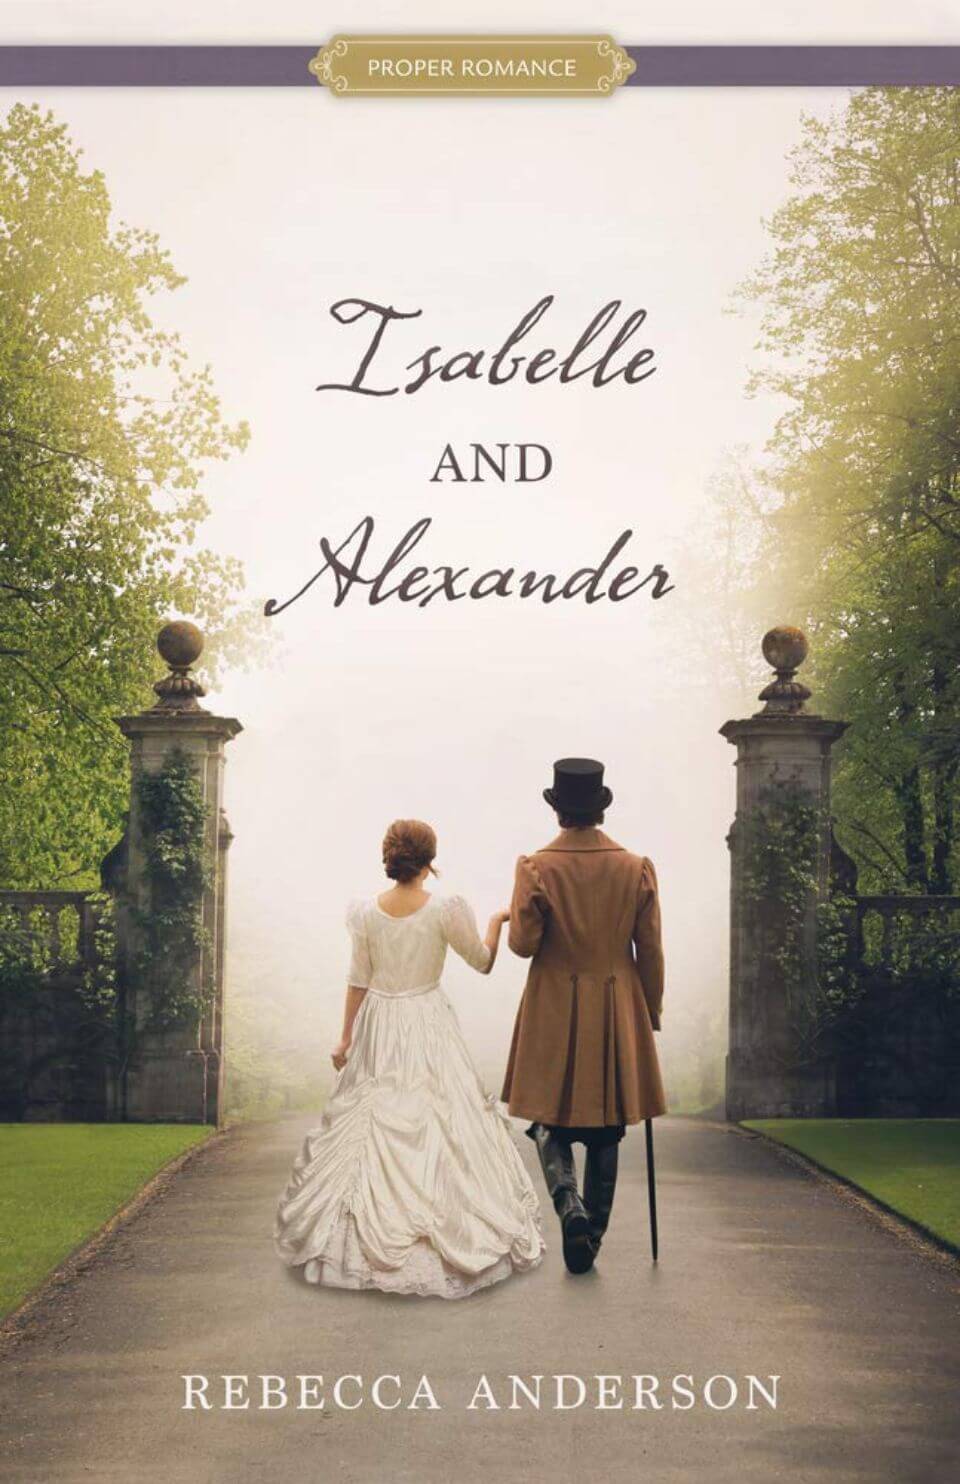 Isabelle and Alexander book cover